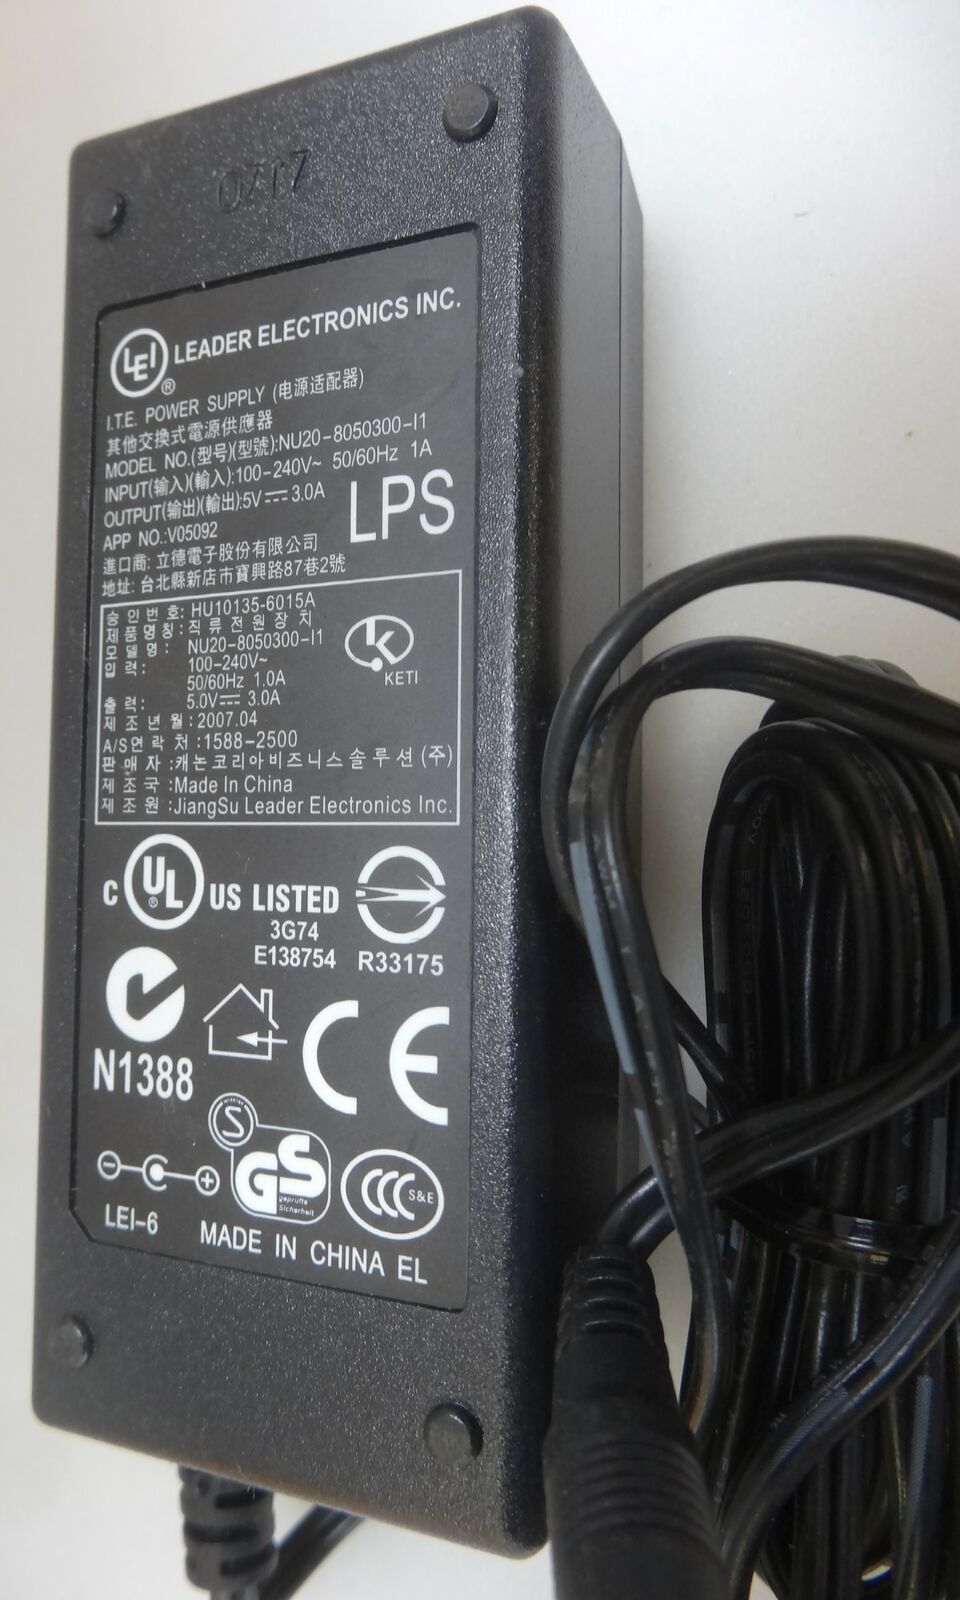 New LEI NU20-8050300-I1 Adapter 5V 3.0A Charger for Laptop Power Supply